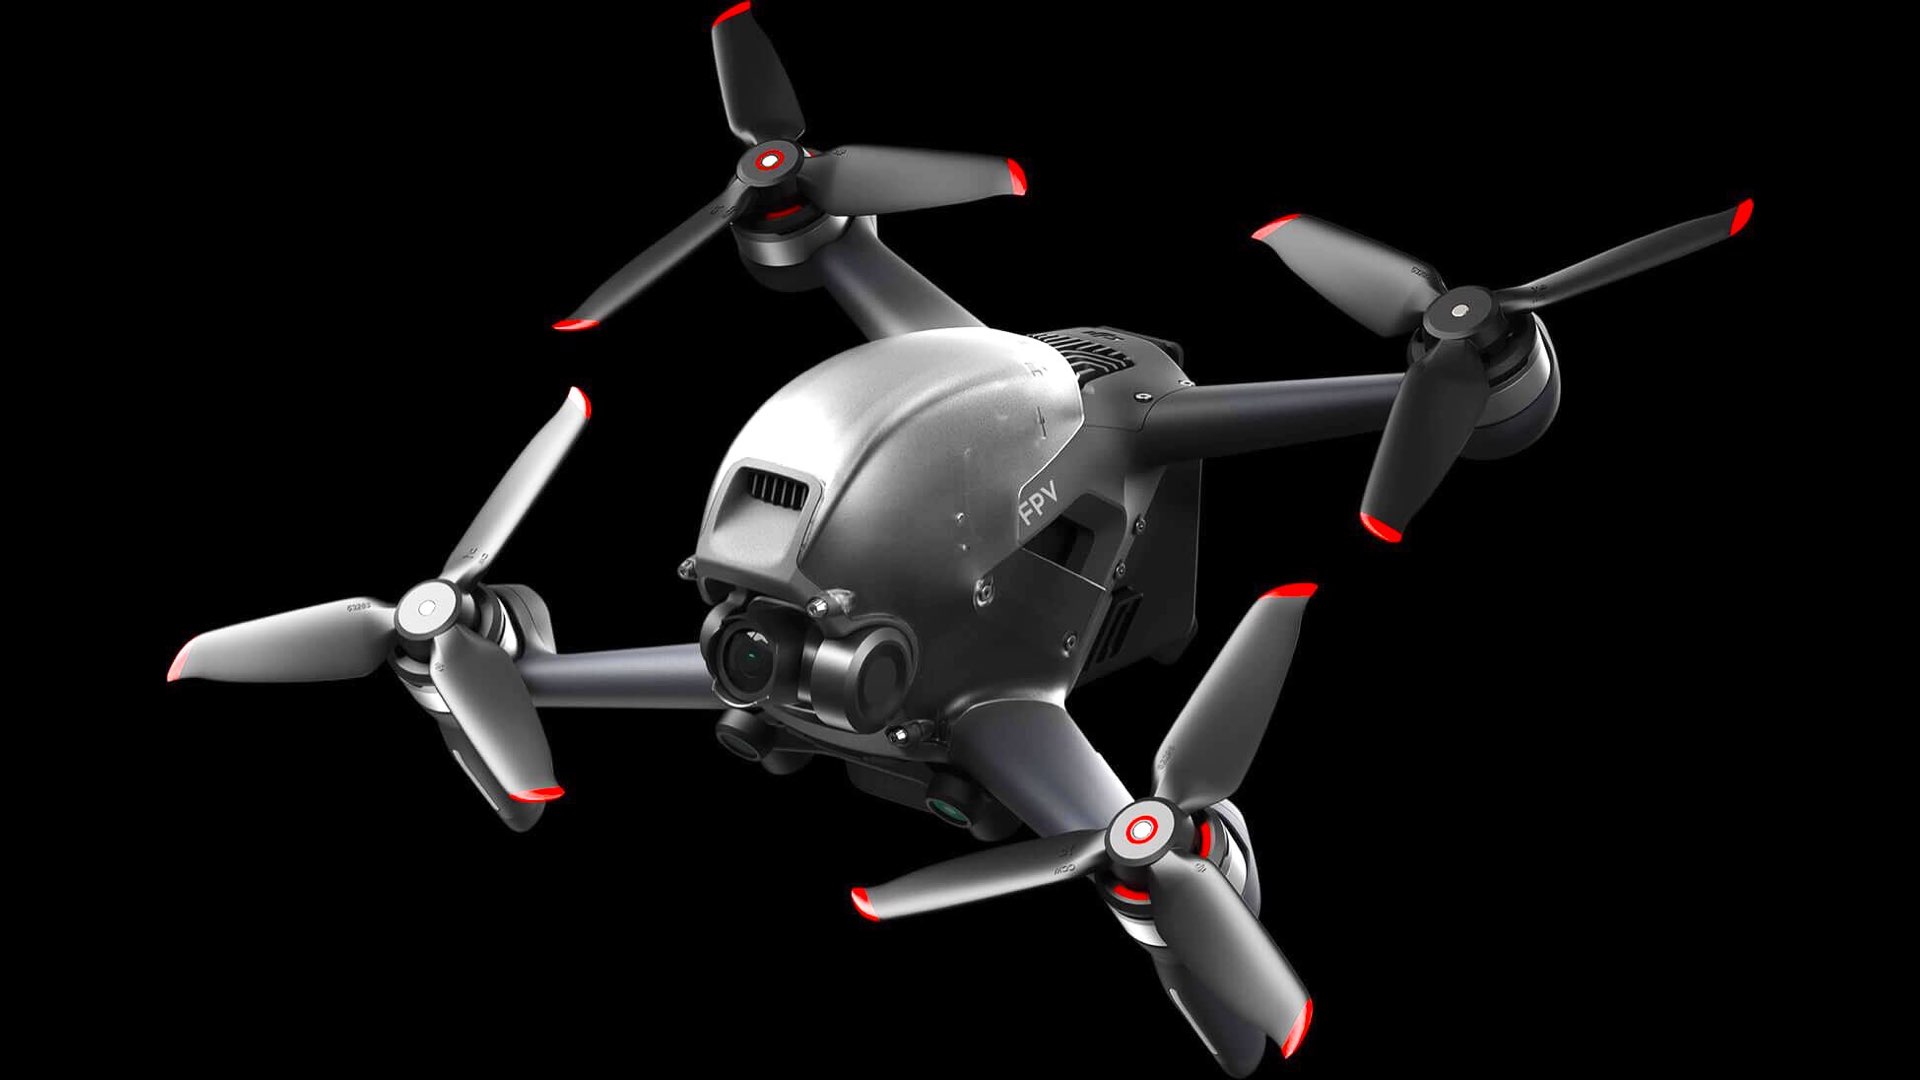 DJI Announces its First FPV Drone: 4K, 60FPS and Speed of 140kph - YMCinema News & Insights on Digital Cinema